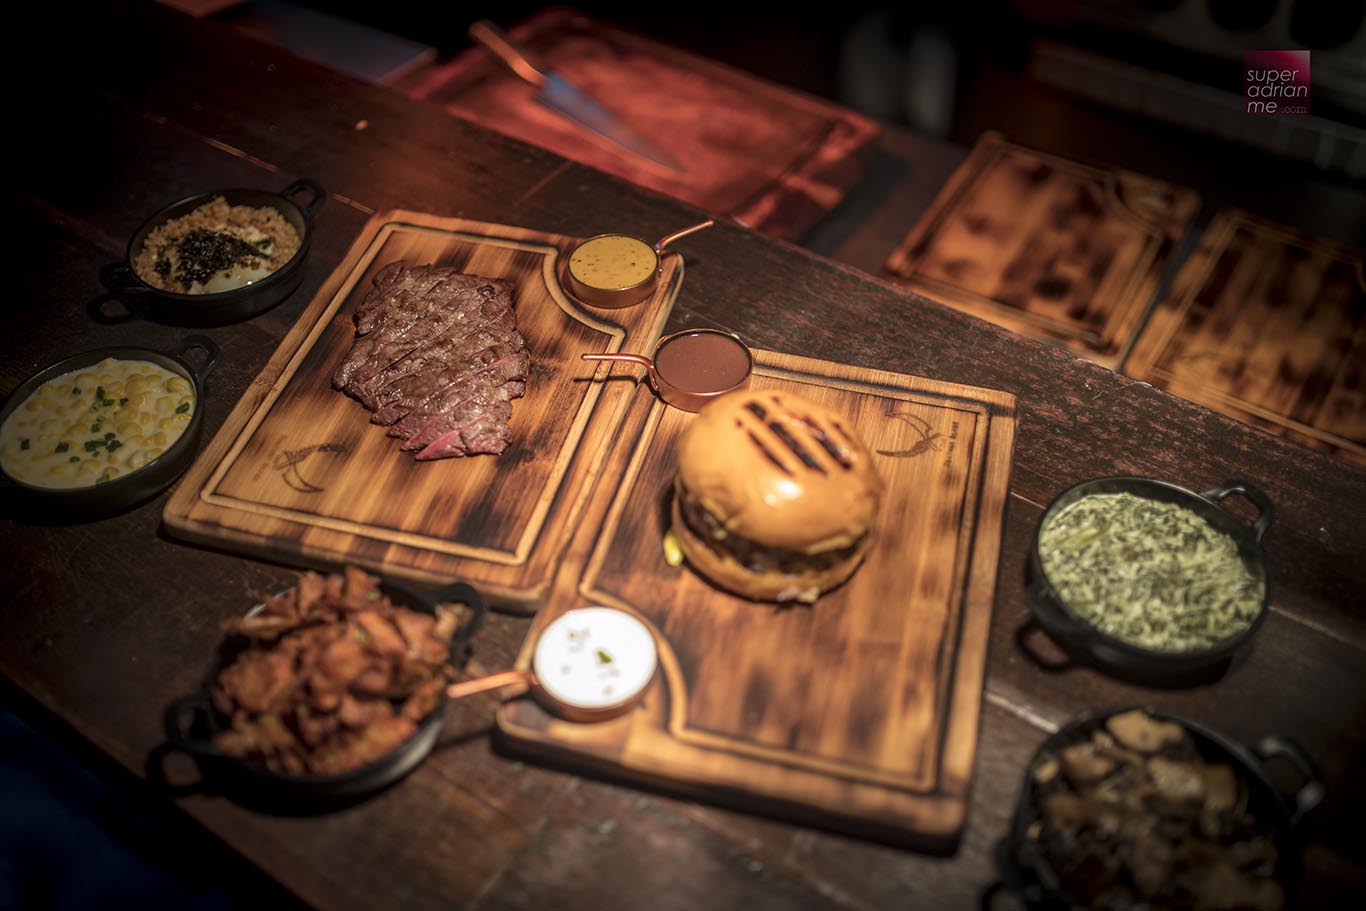 The Feather Blade Steak and Burger with sauces and sides